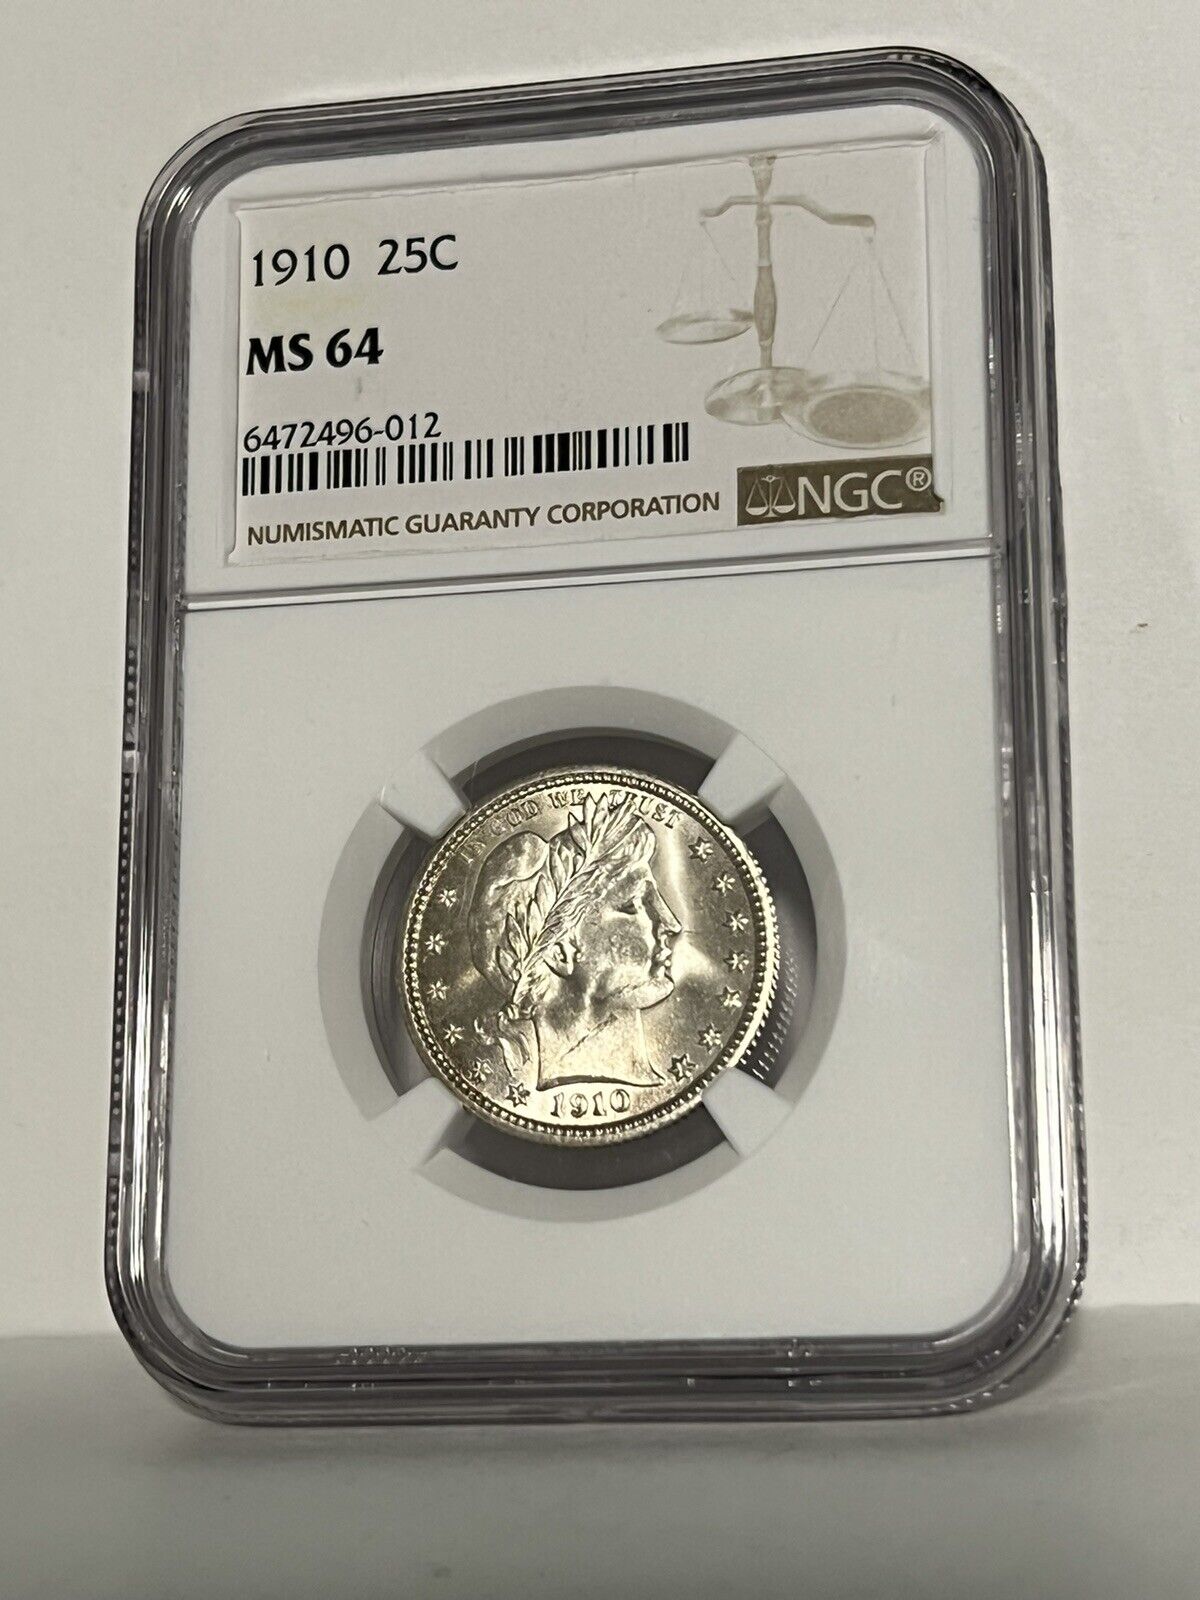 Us 1910 Barber Quarter Ngc Graded Ms 64 Silver 25 Cent Coin